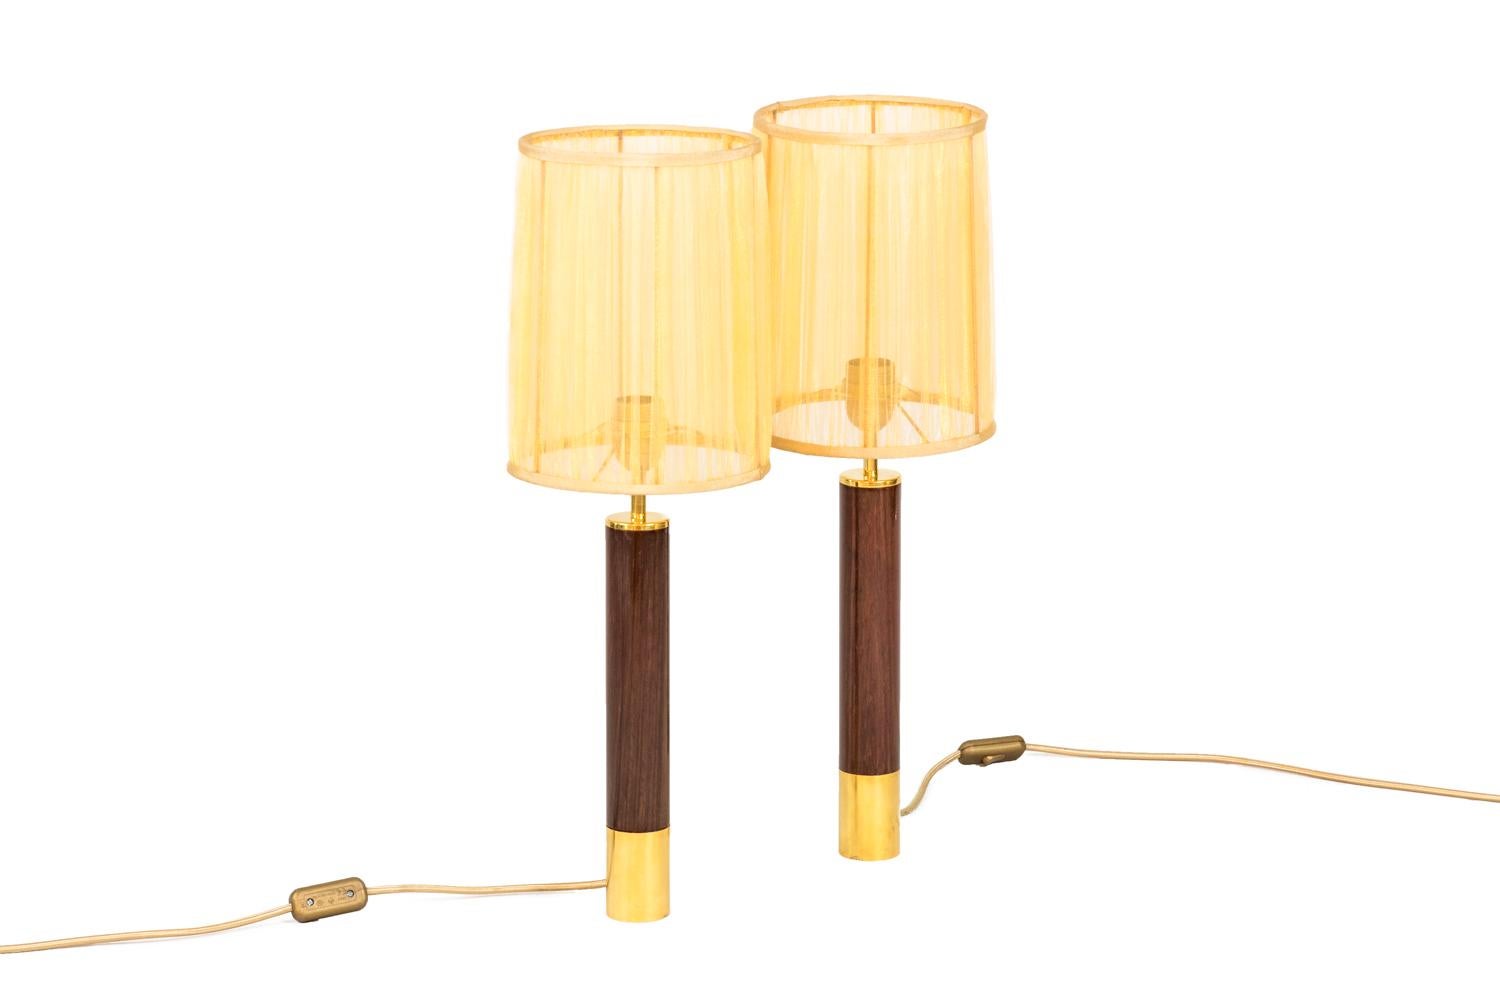 Santa & Cole, attributed to.
Pair of tubular shape “Basica” lamps in rosewood, surrounded by gilt brass ring on the bottom.

Work realized in the 1980s.

New and functional electrical system.

The price doesn’t include the lampshade price.